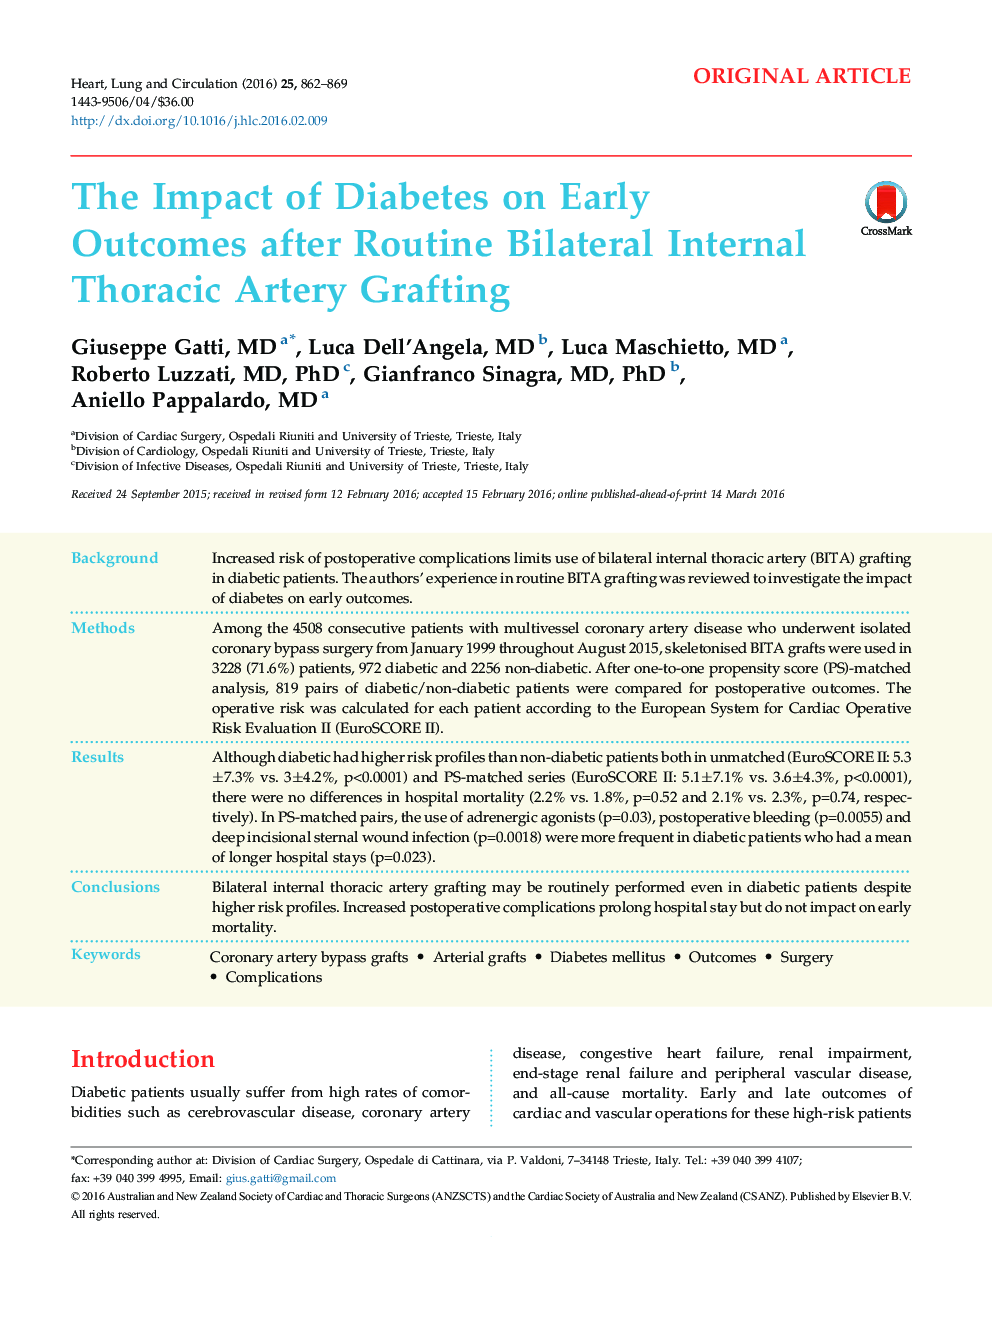 The Impact of Diabetes on Early Outcomes after Routine Bilateral Internal Thoracic Artery Grafting